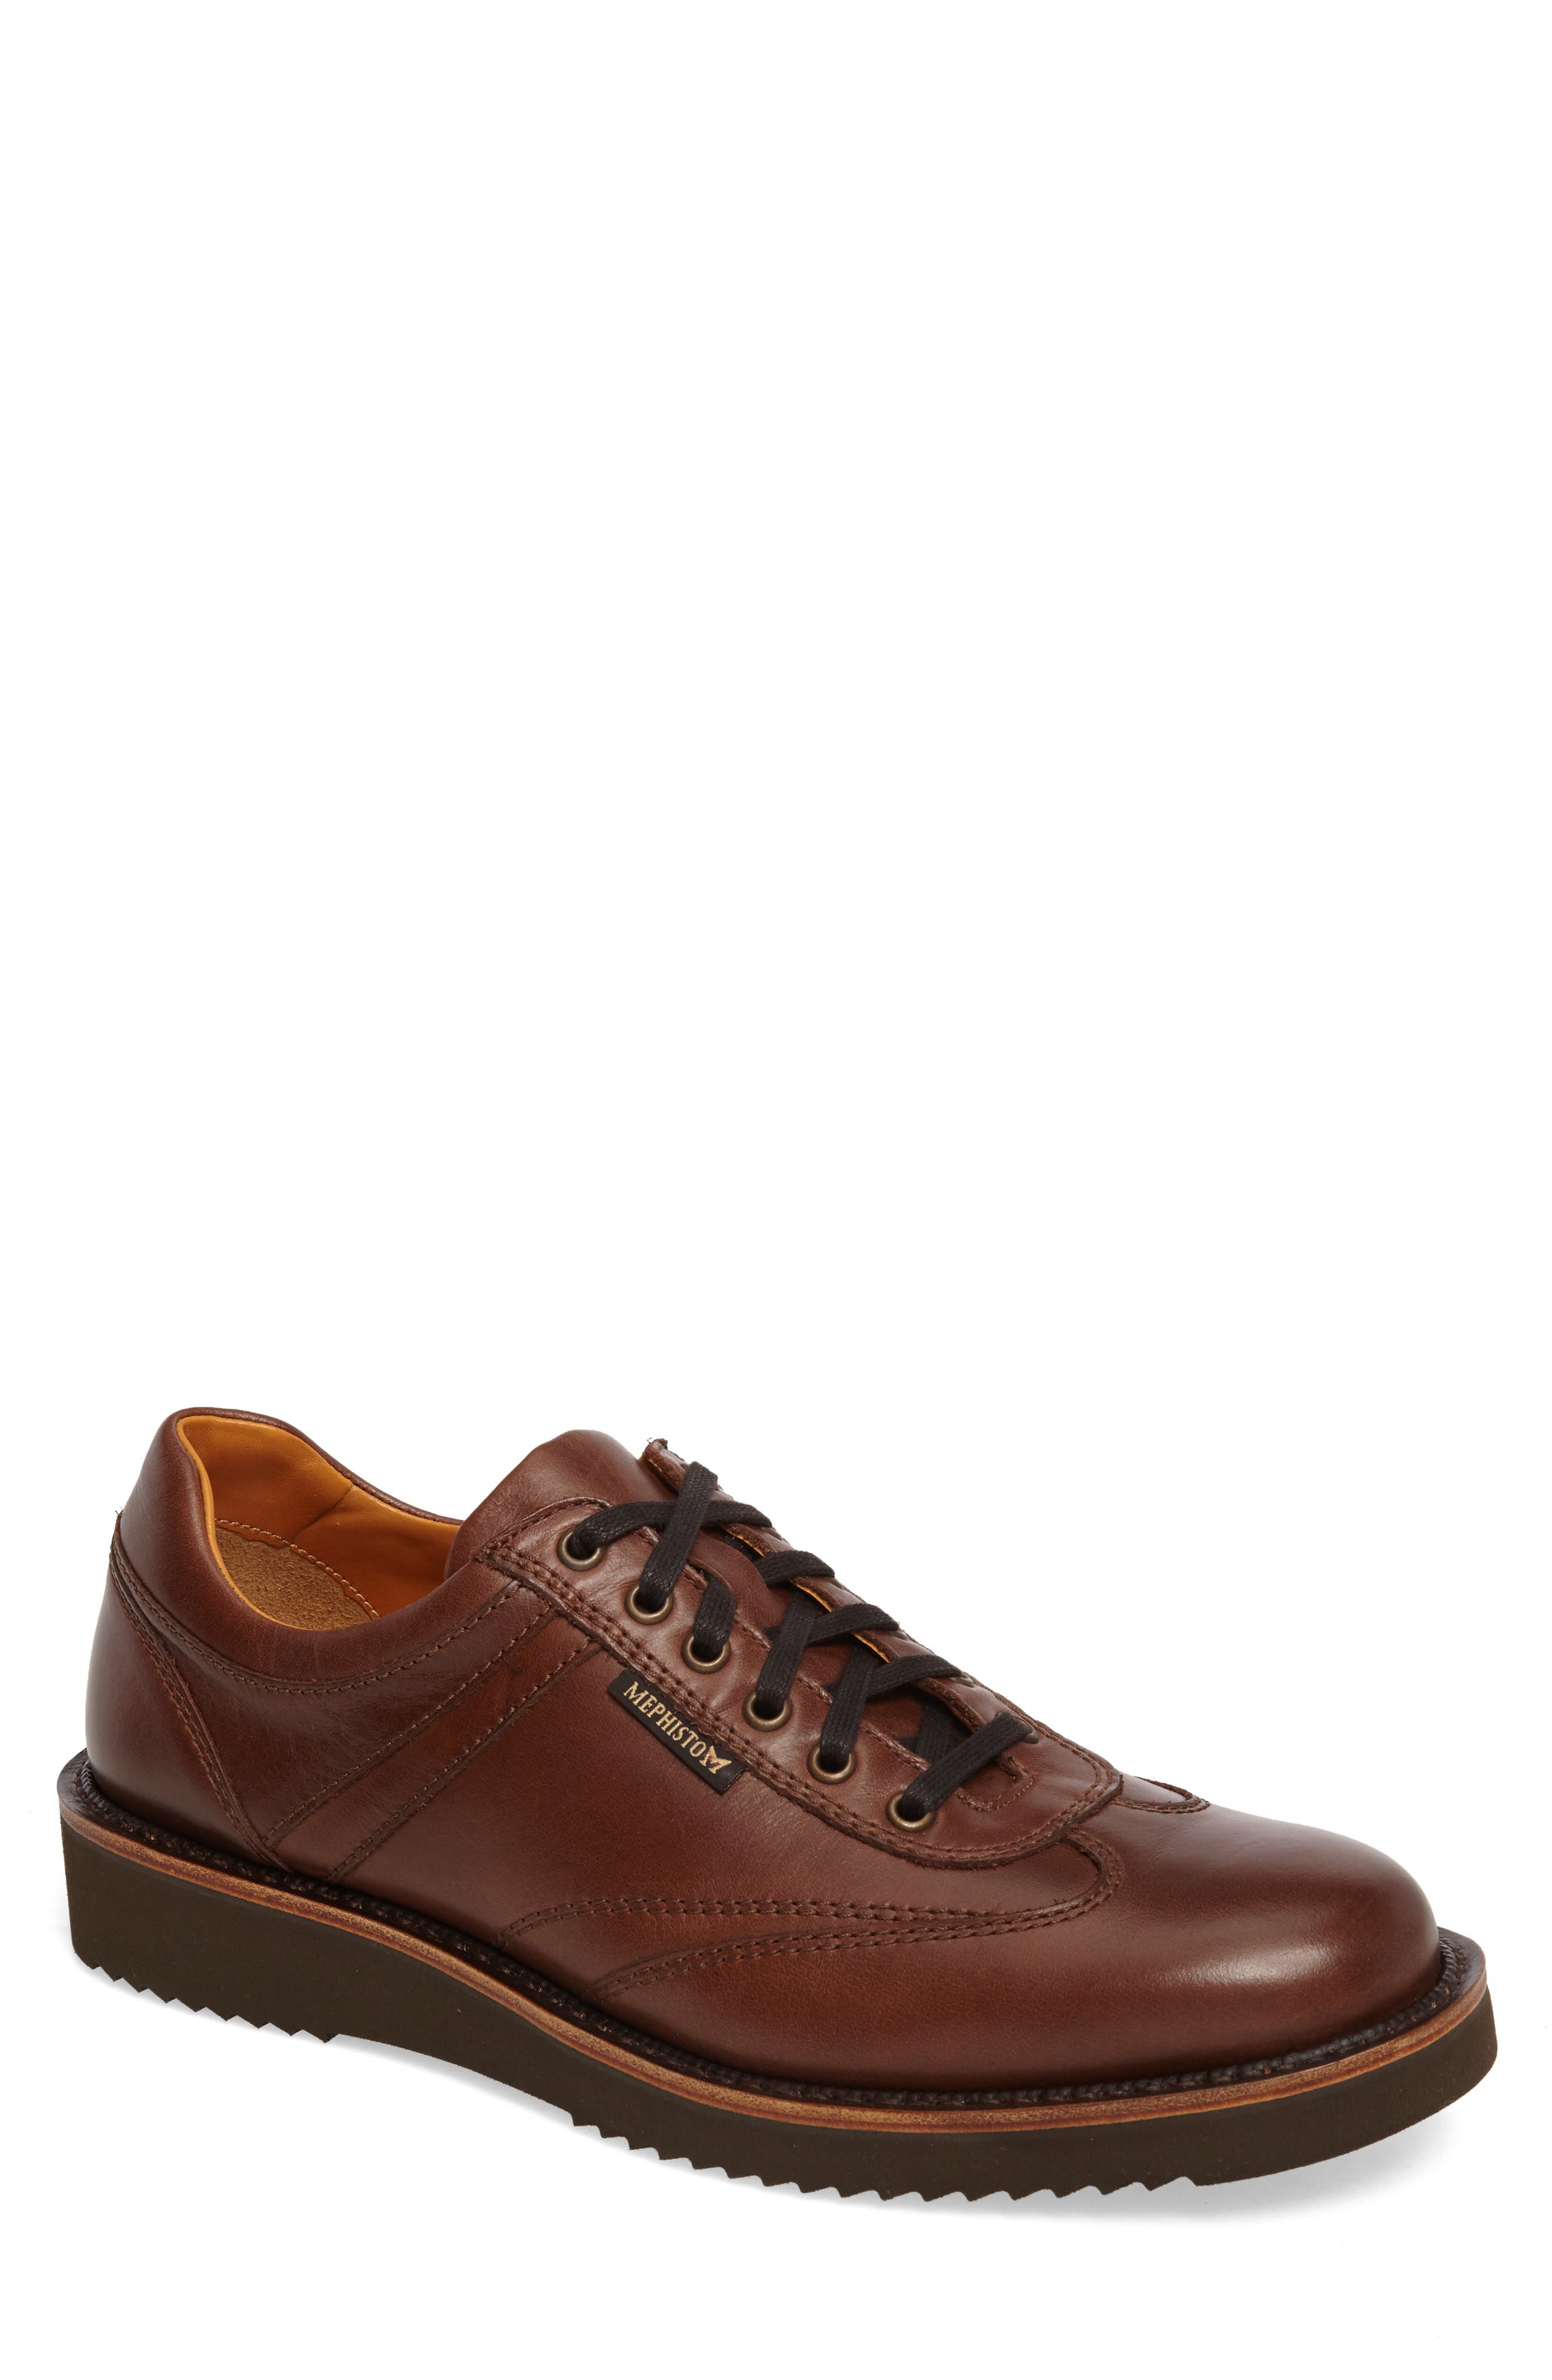 UPC 191993000211 product image for Men's Mephisto Adriano Sneaker, Size 9 M - Brown | upcitemdb.com